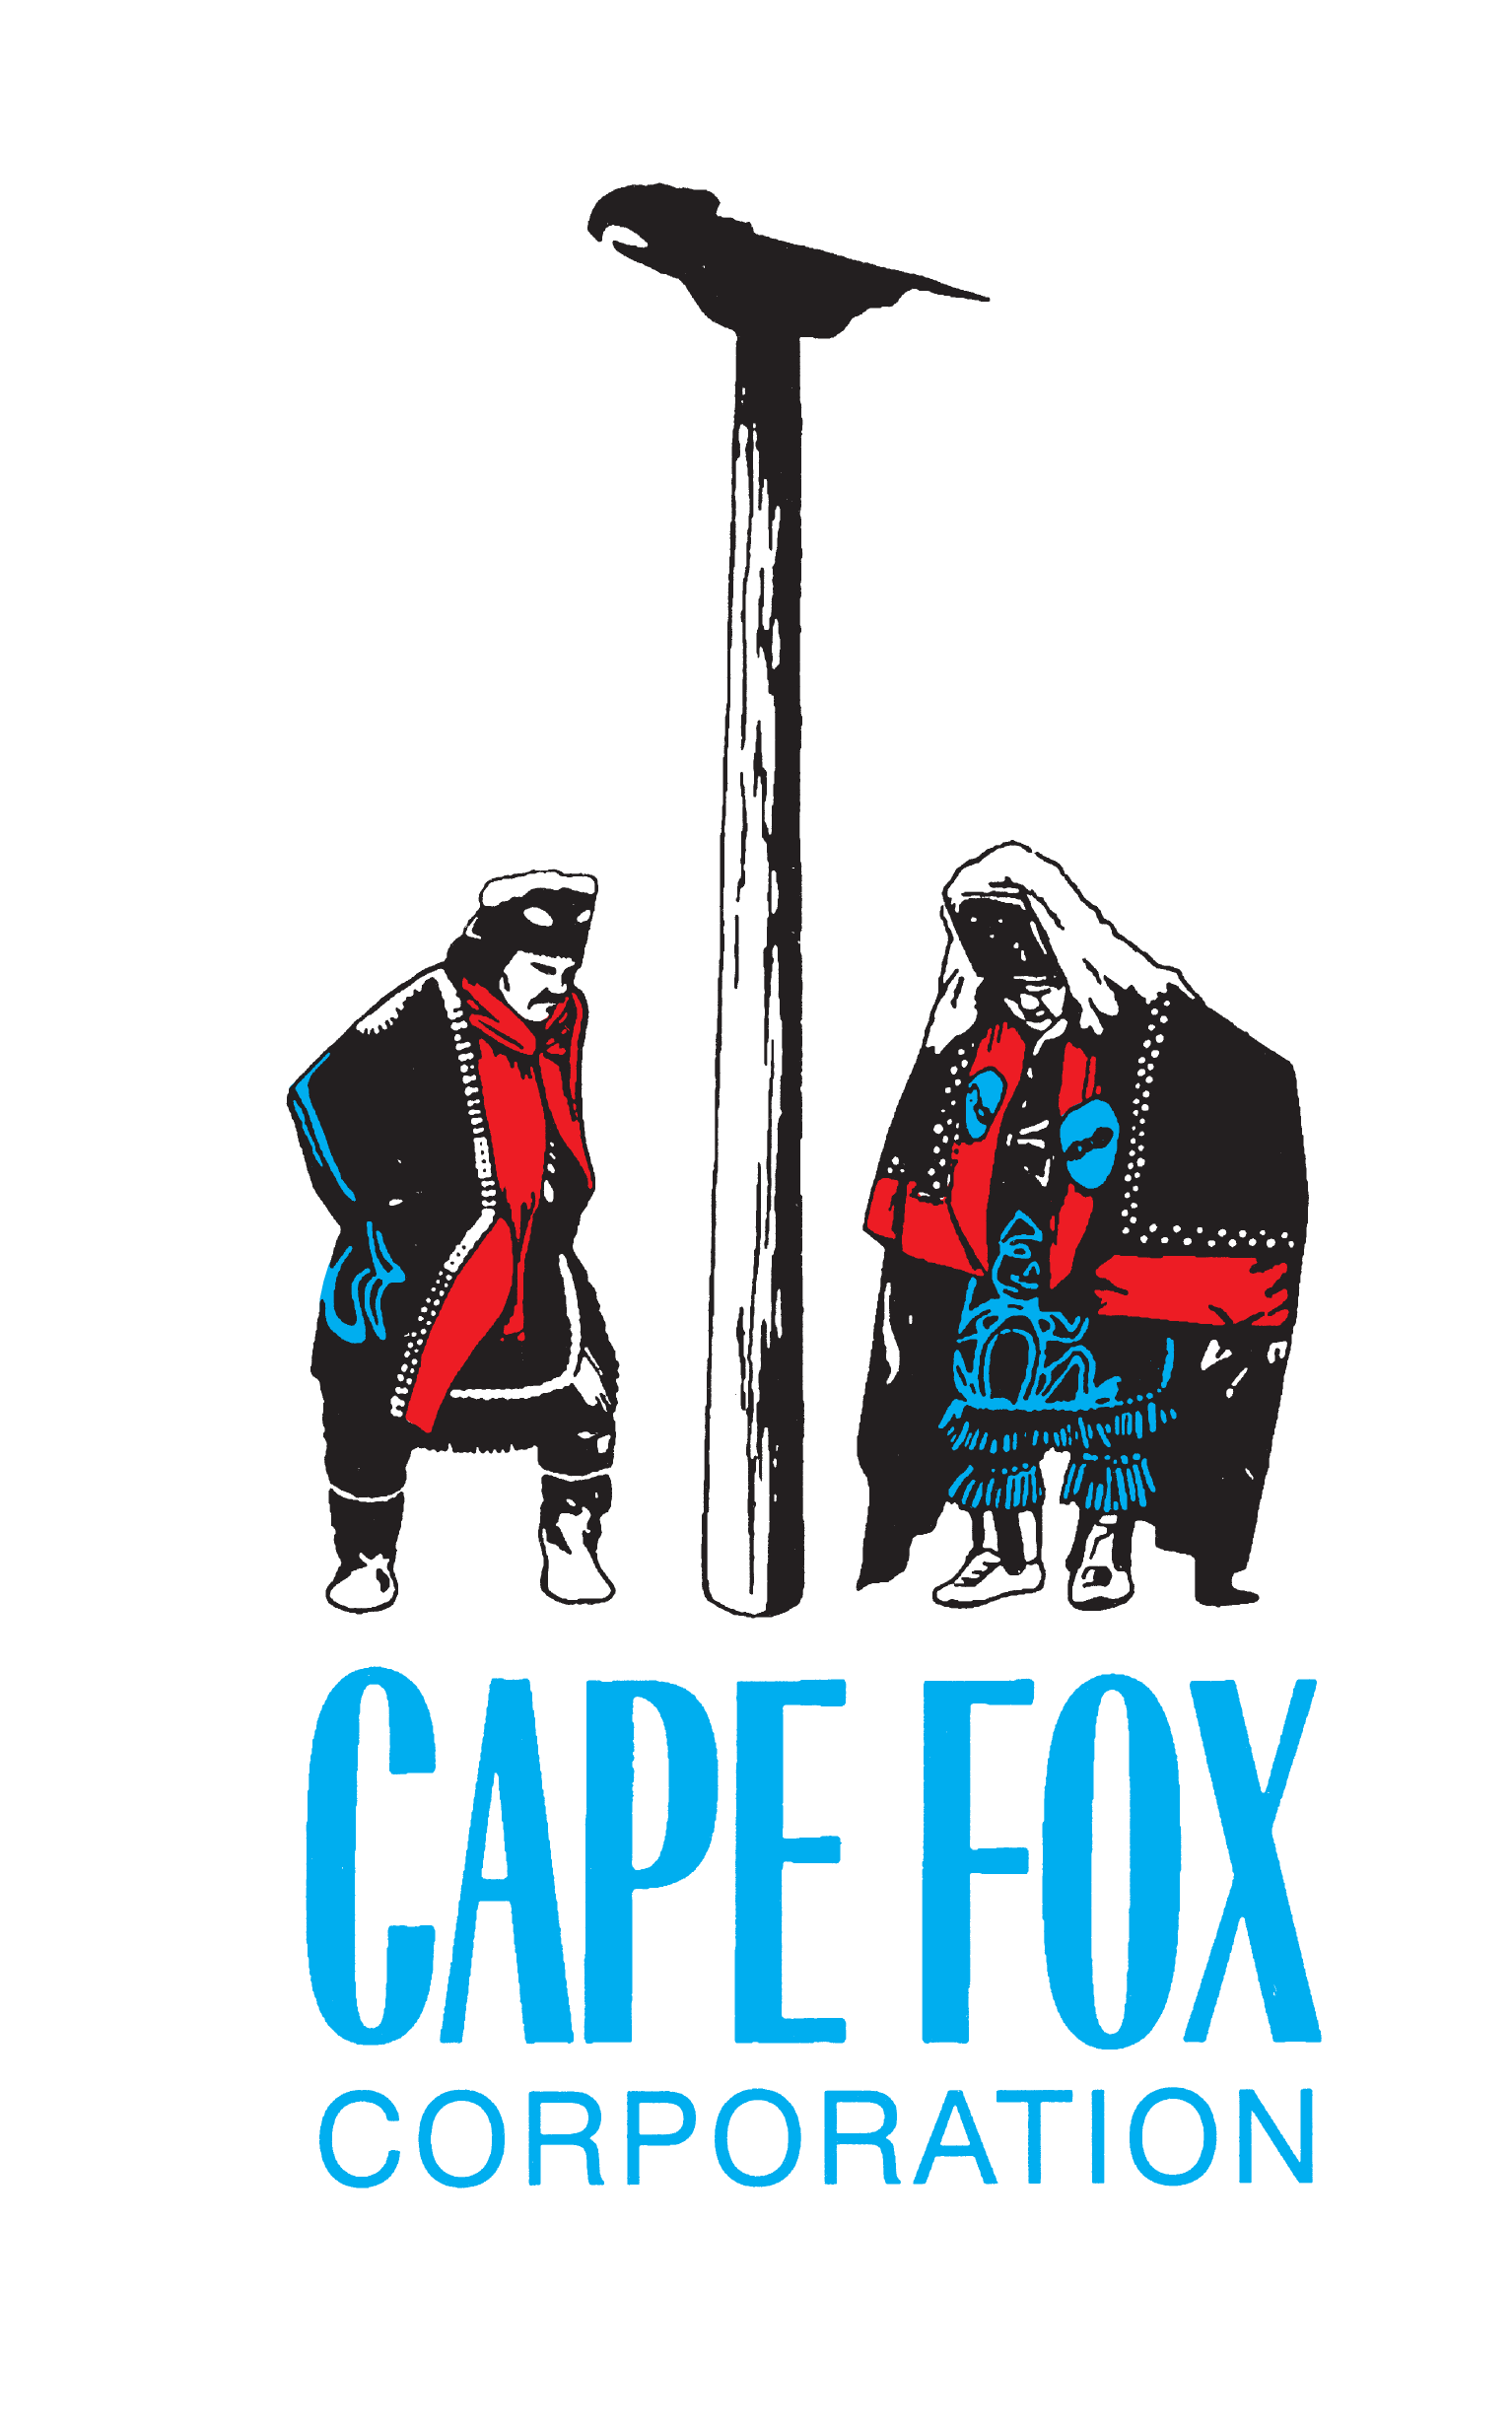 Cape Fox Lodge and Baranof Fishing Dream Up an Ideal